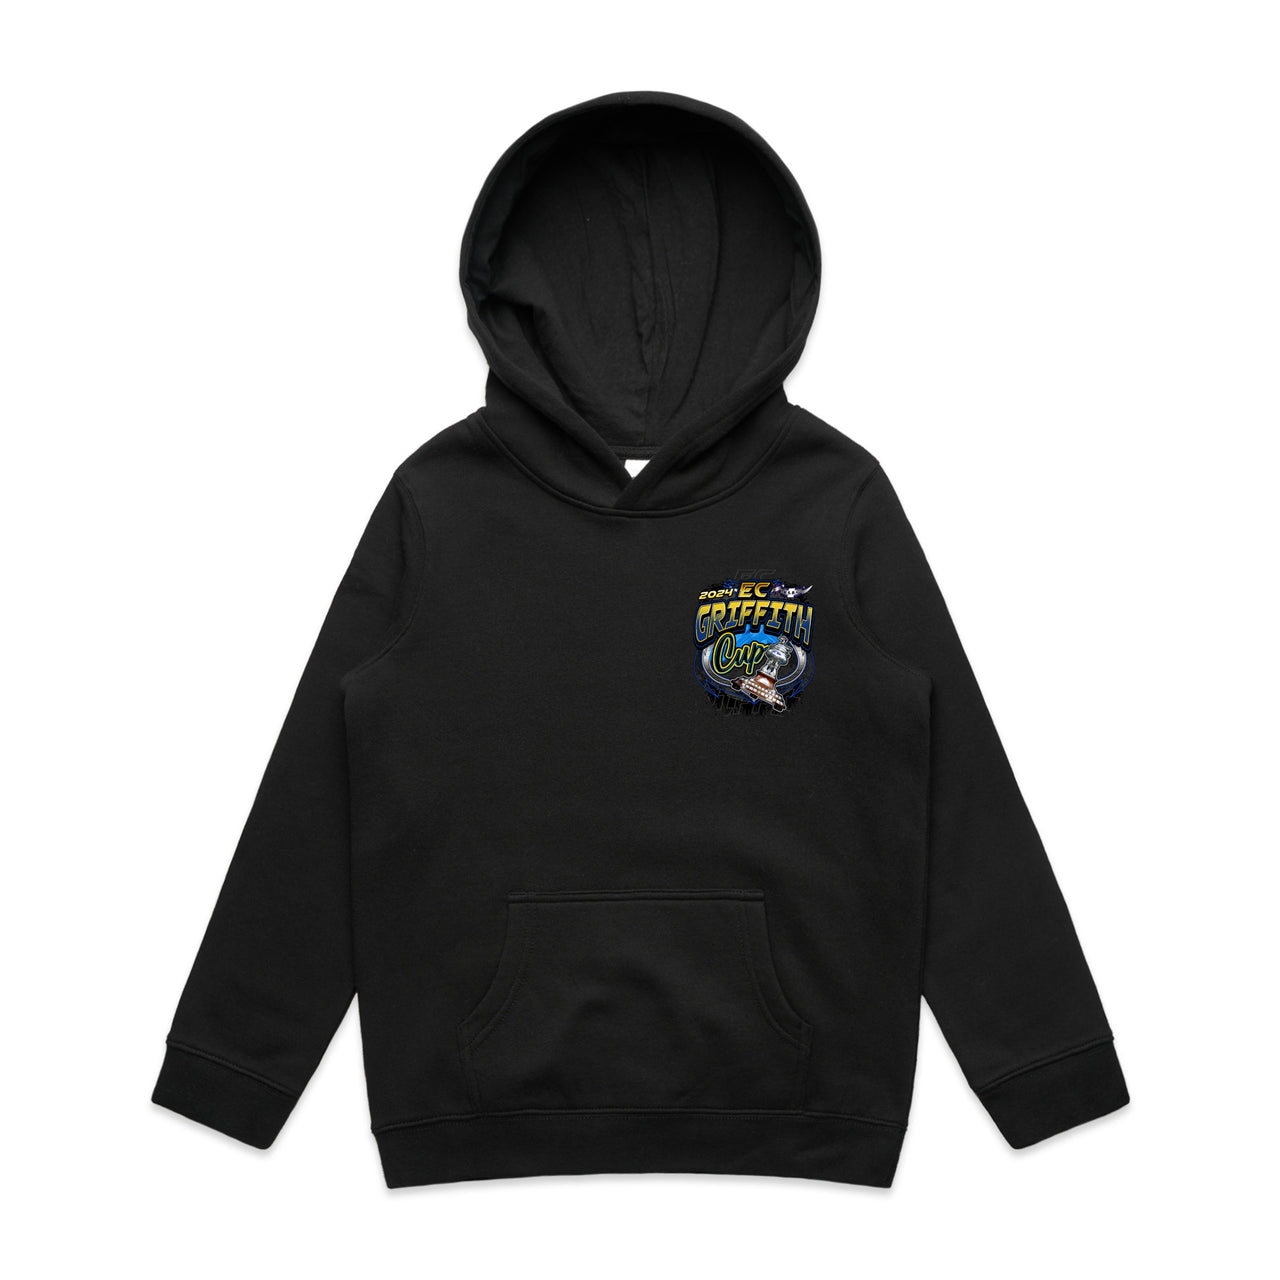 E.C Griffith Cup 2024 Event Kids Youth Hoodie